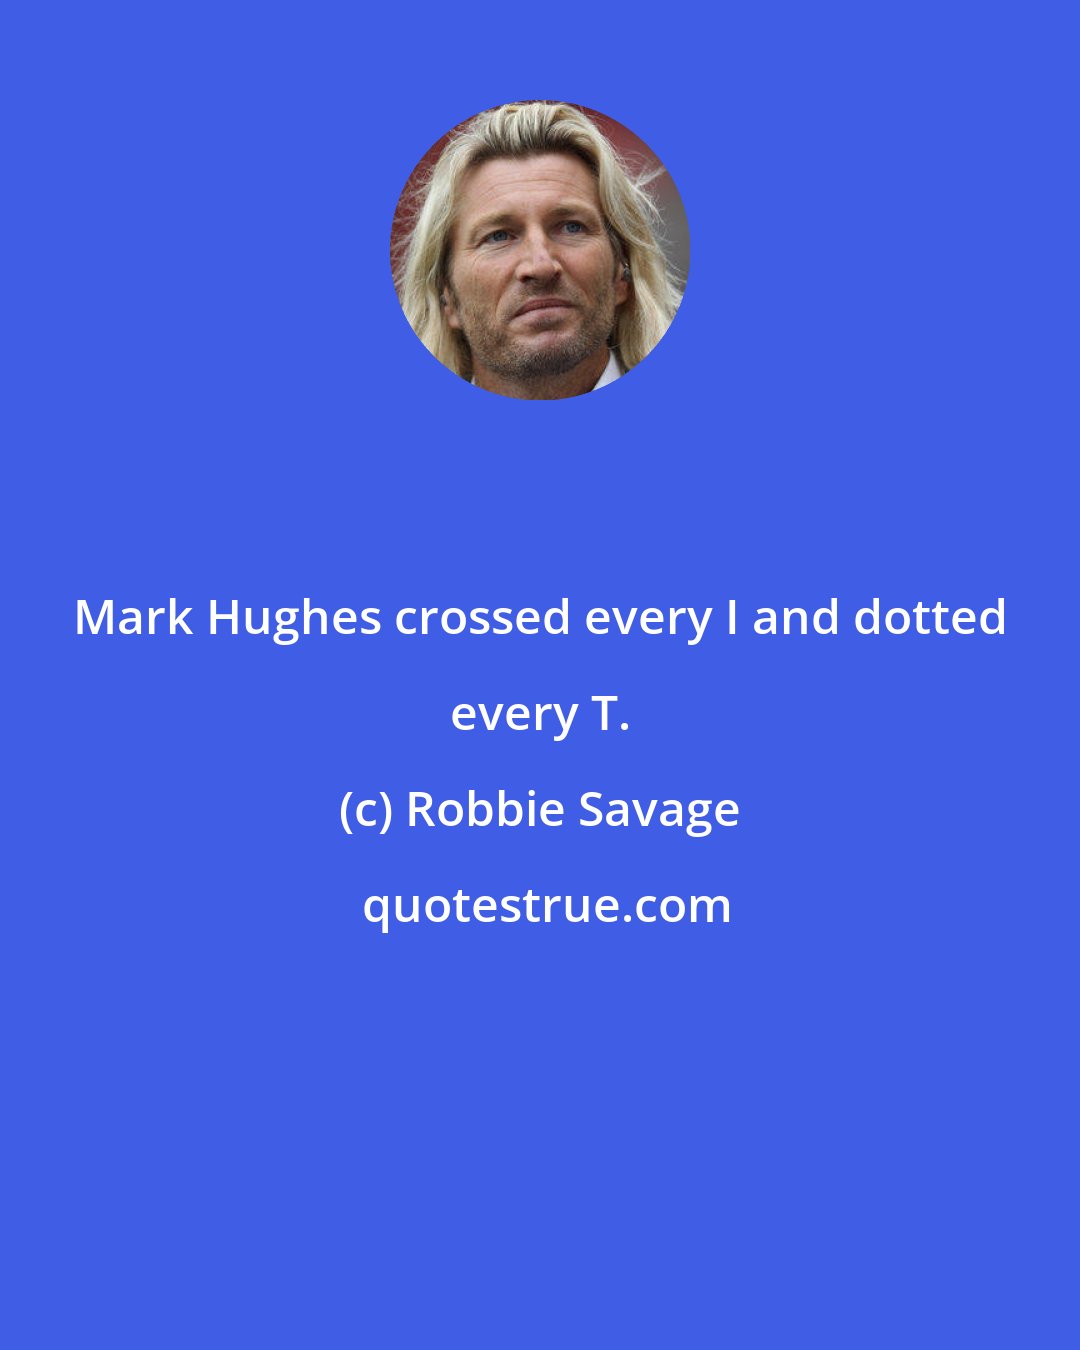 Robbie Savage: Mark Hughes crossed every I and dotted every T.